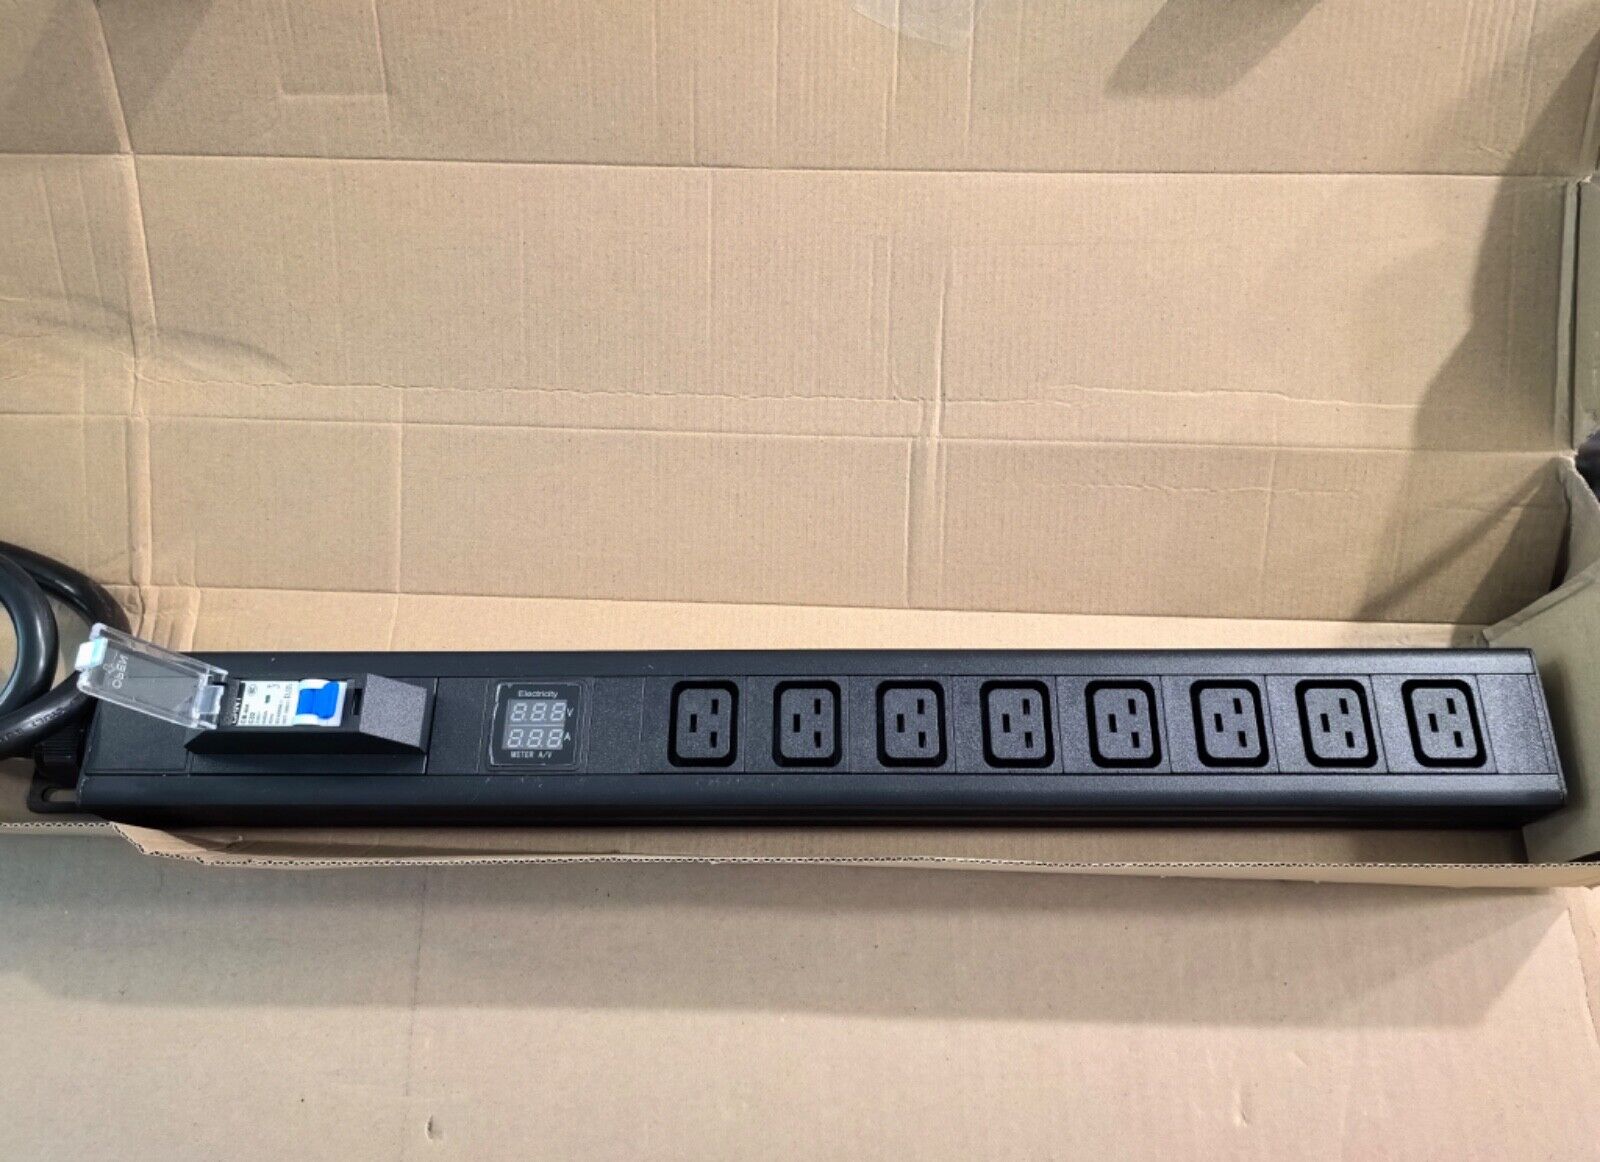 New LCD Metered PDU 240V 30A L8-30P 8x C19 Cryptocurrency Mining with Breaker